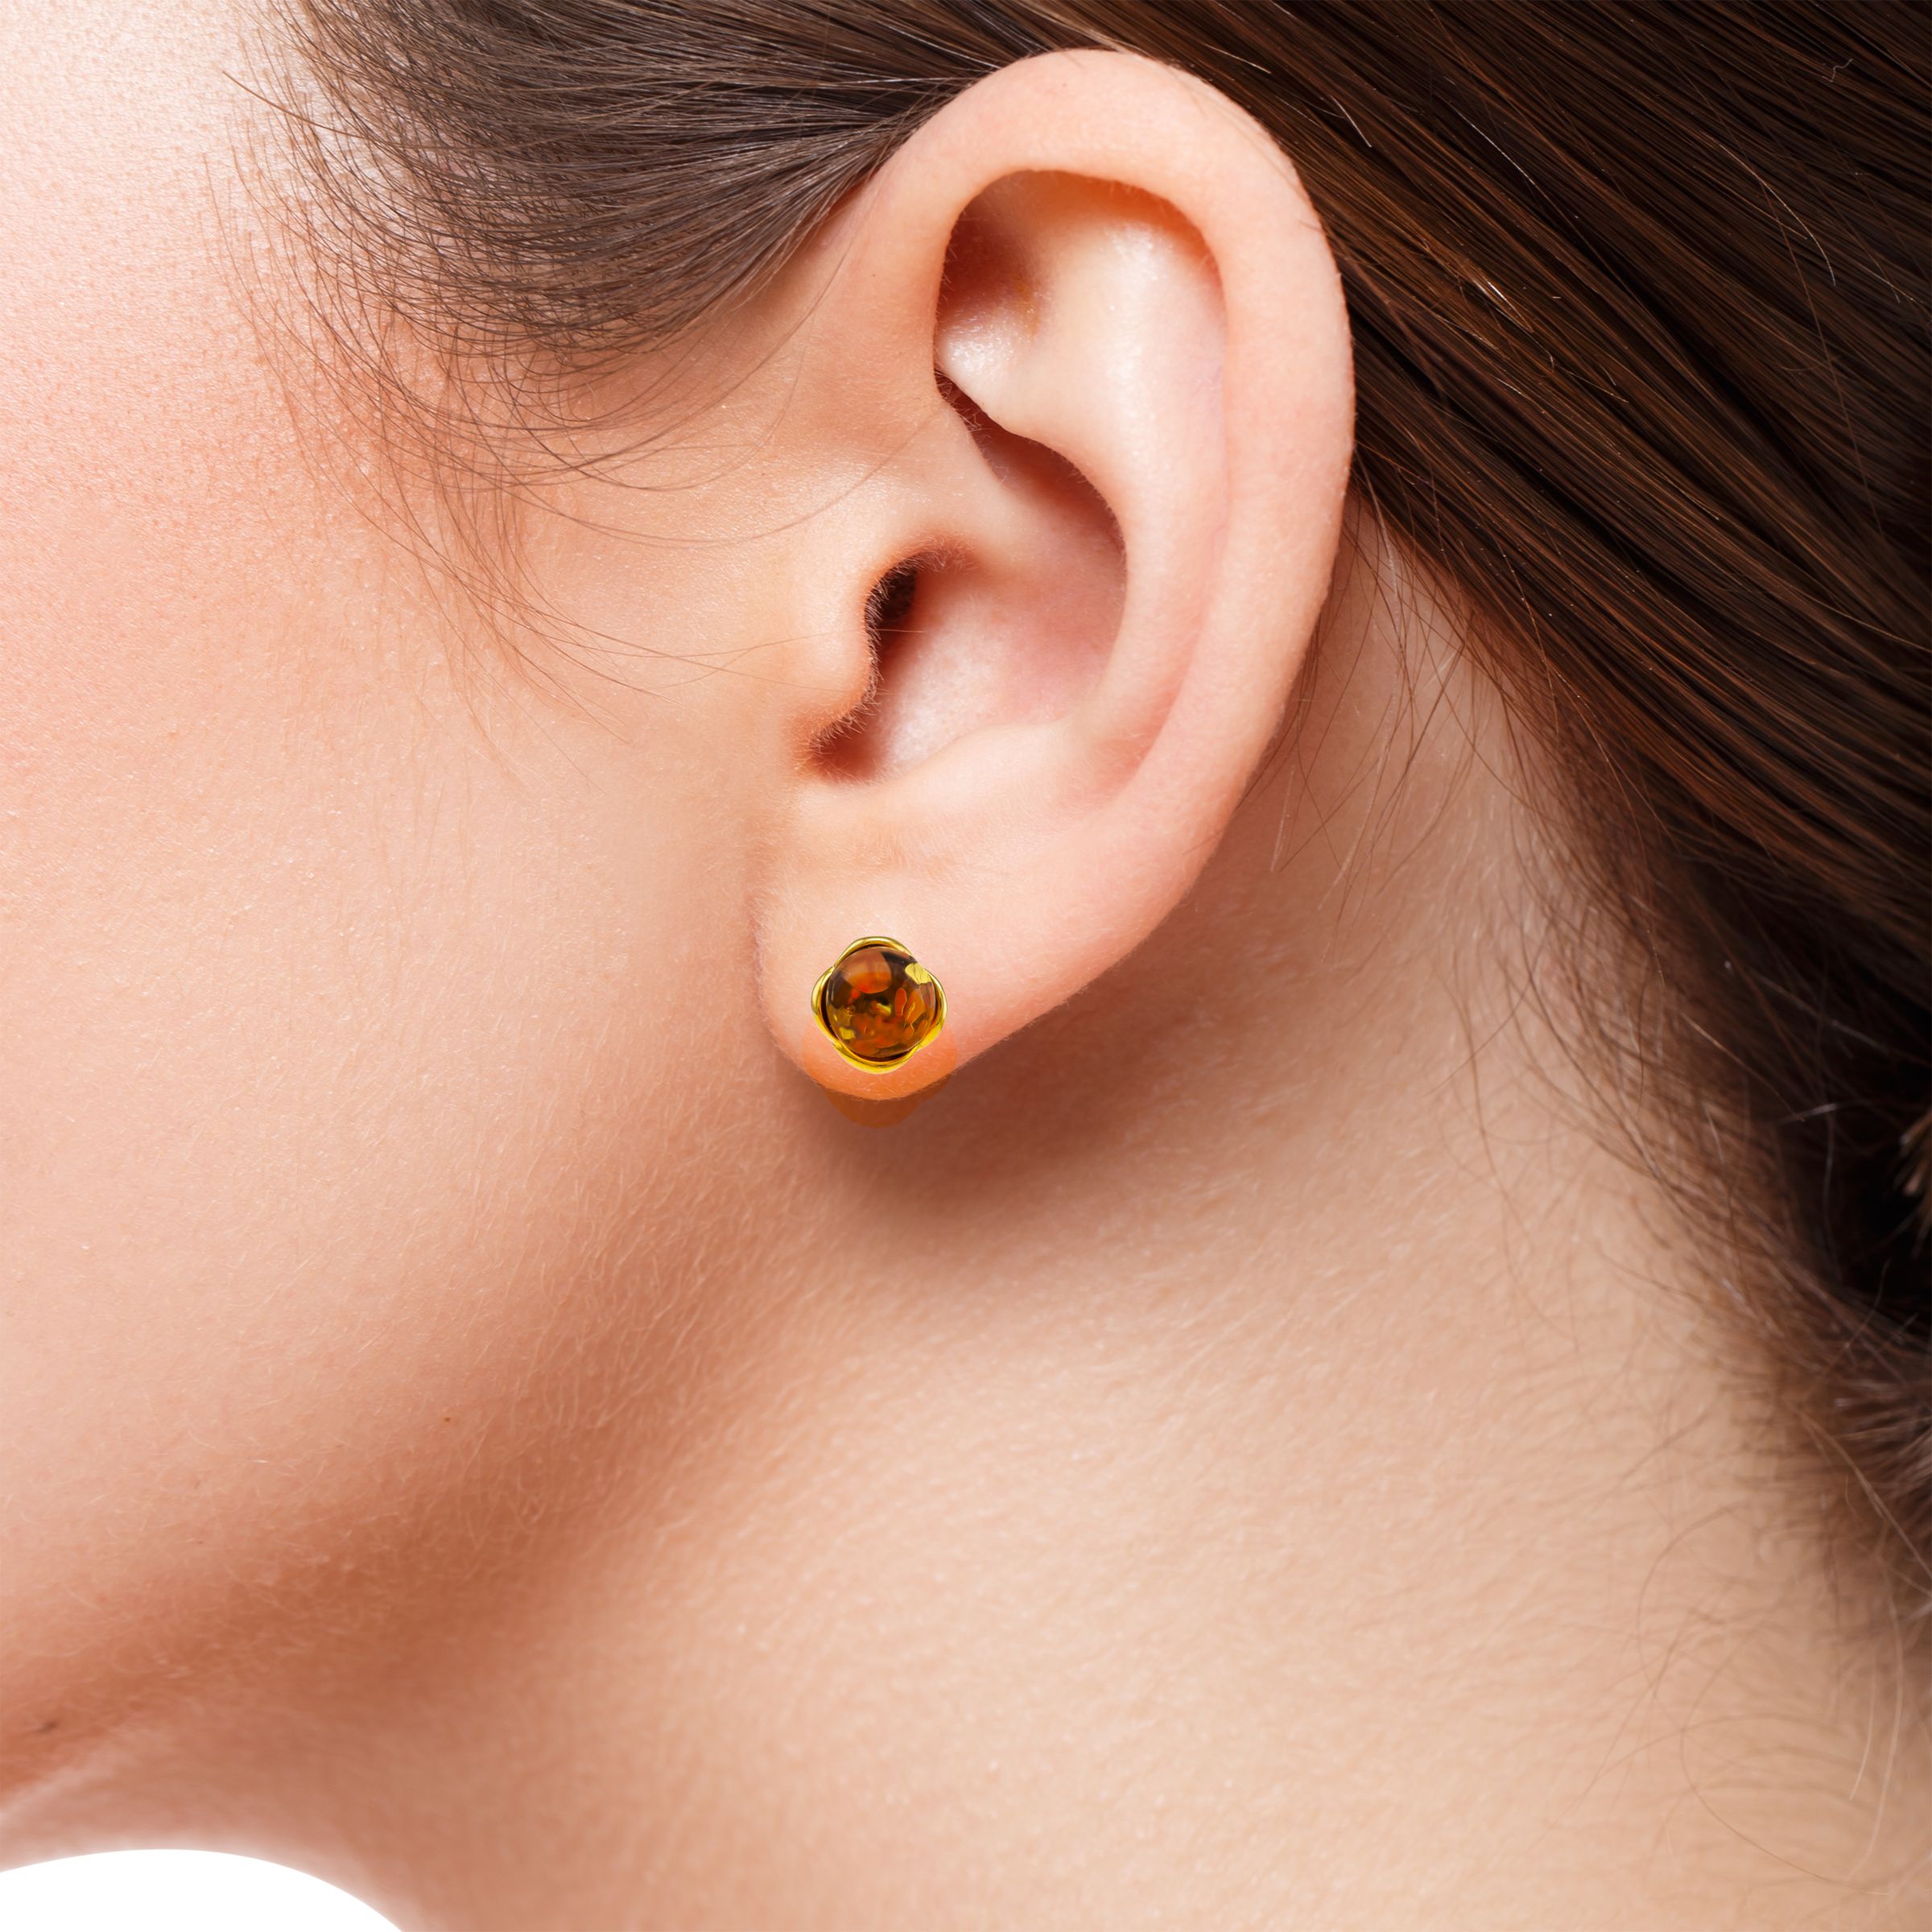 Buy Be-Jewelled Round Amber Stud Earrings, Gold/Cognac Online at johnlewis.com